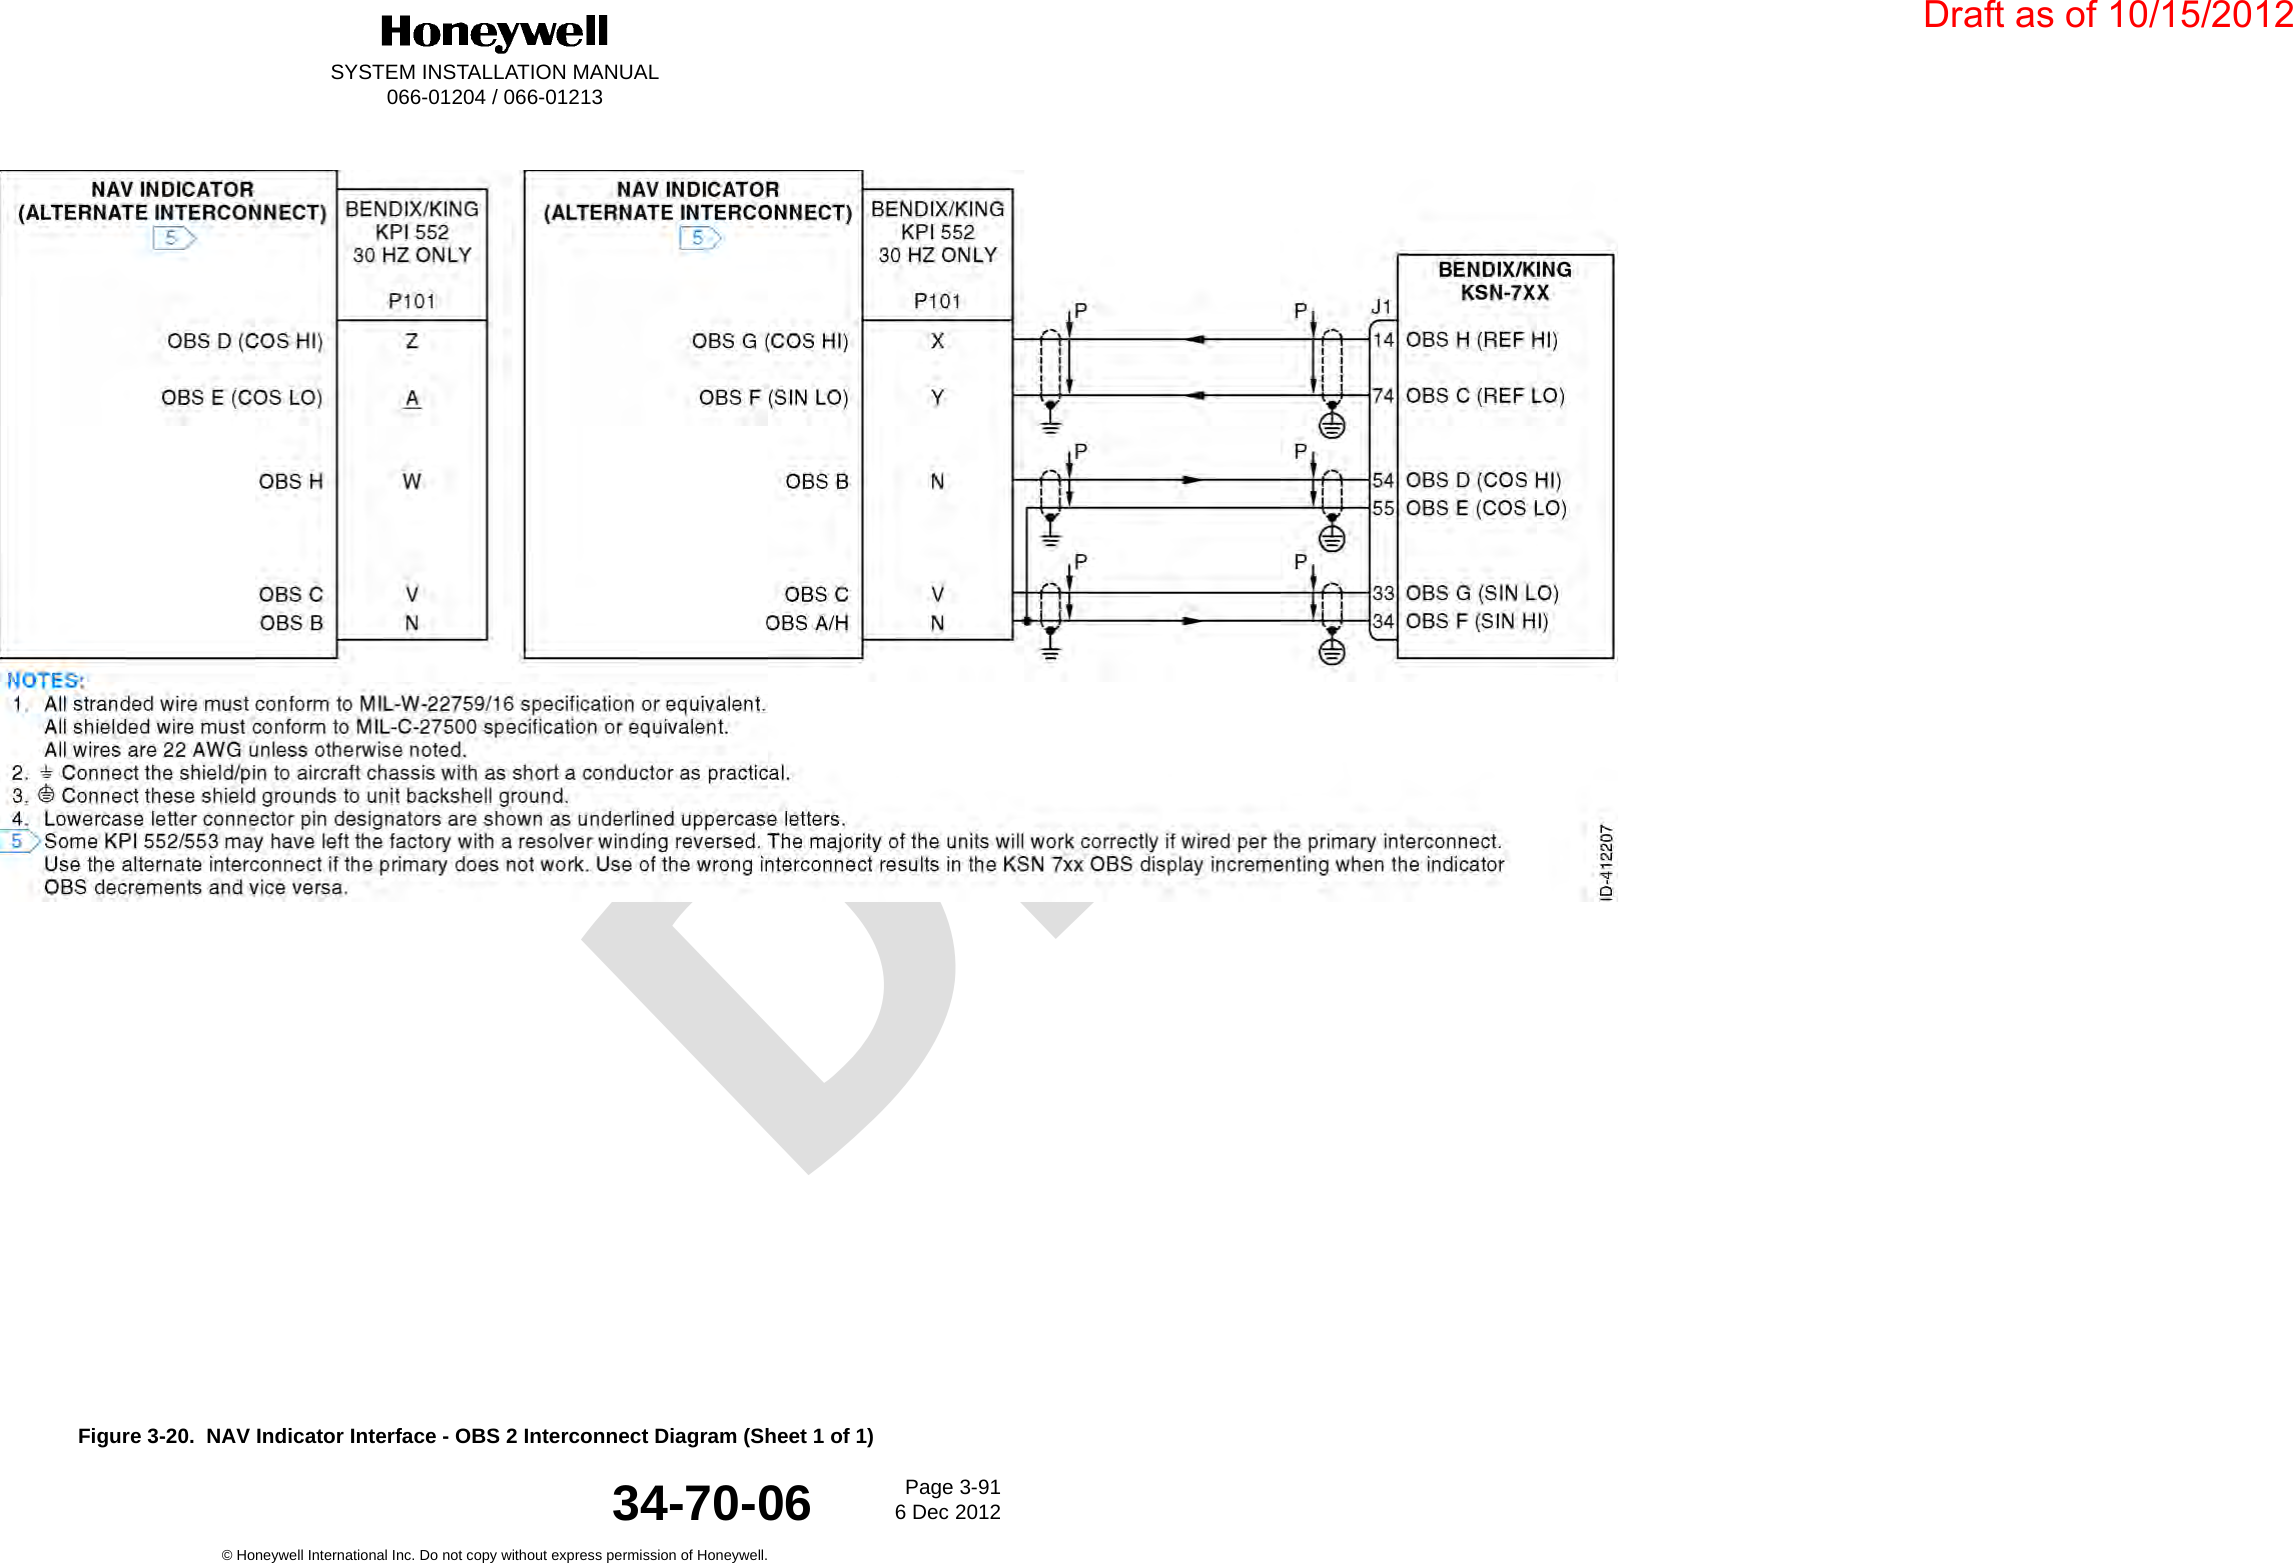 DraftSYSTEM INSTALLATION MANUAL066-01204 / 066-01213Page 3-916 Dec 2012© Honeywell International Inc. Do not copy without express permission of Honeywell.34-70-06Figure 3-20.  NAV Indicator Interface - OBS 2 Interconnect Diagram (Sheet 1 of 1)Draft as of 10/15/2012